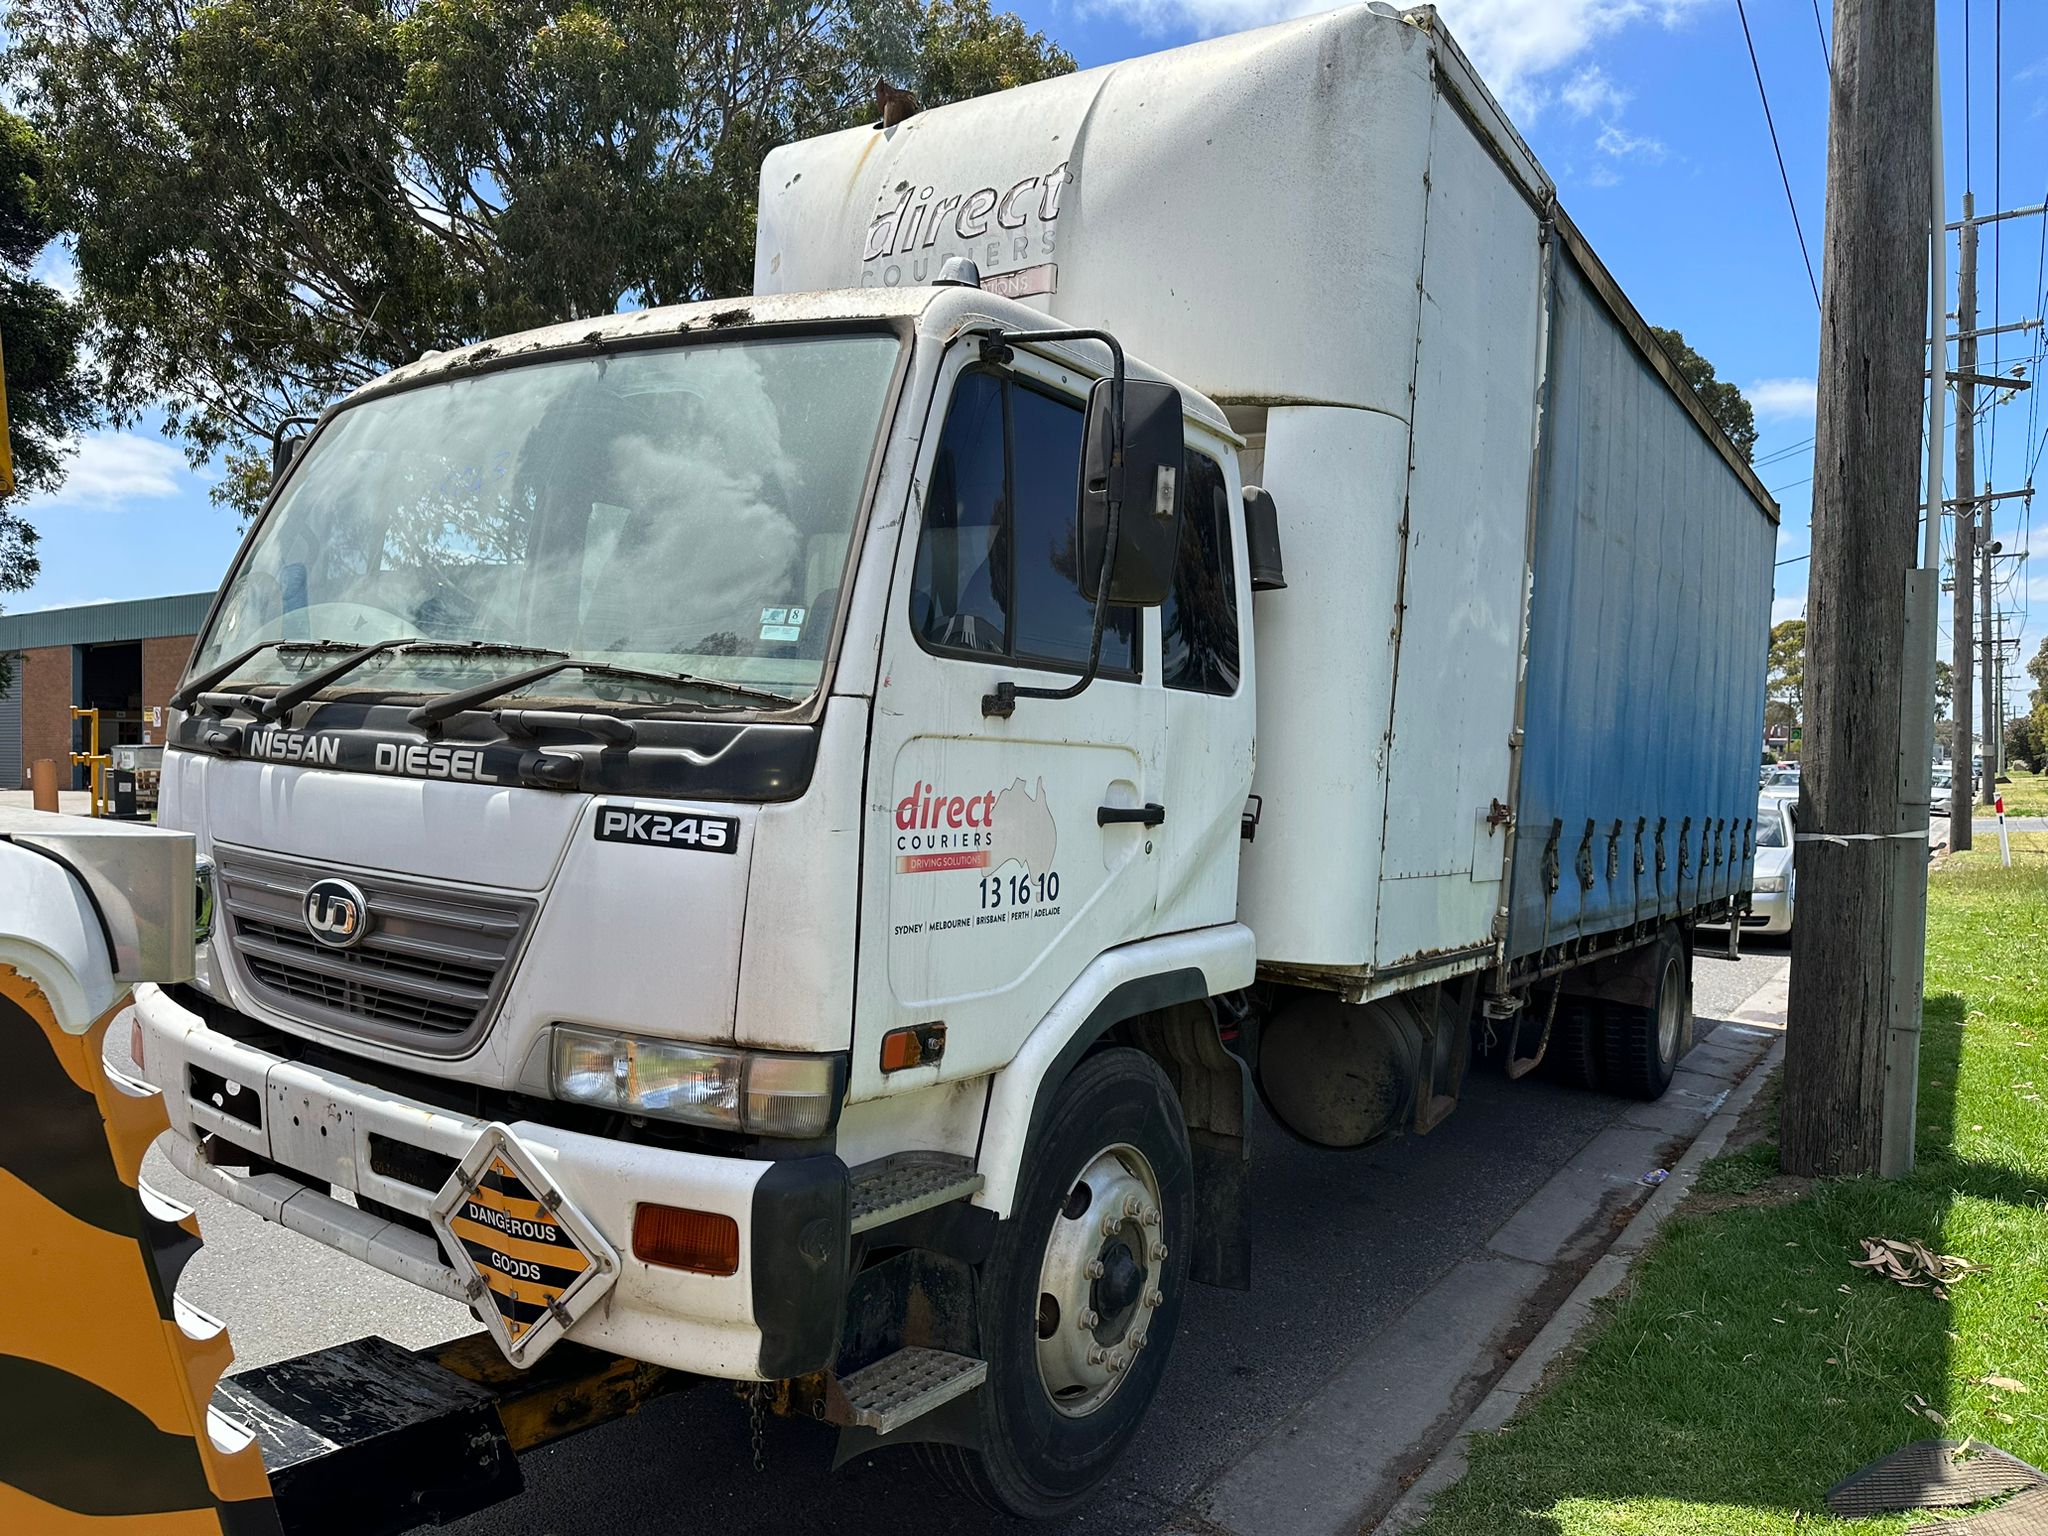 Truck Wreckers Melbourne - Cash For Old,Unwanted & Scrap Trucks